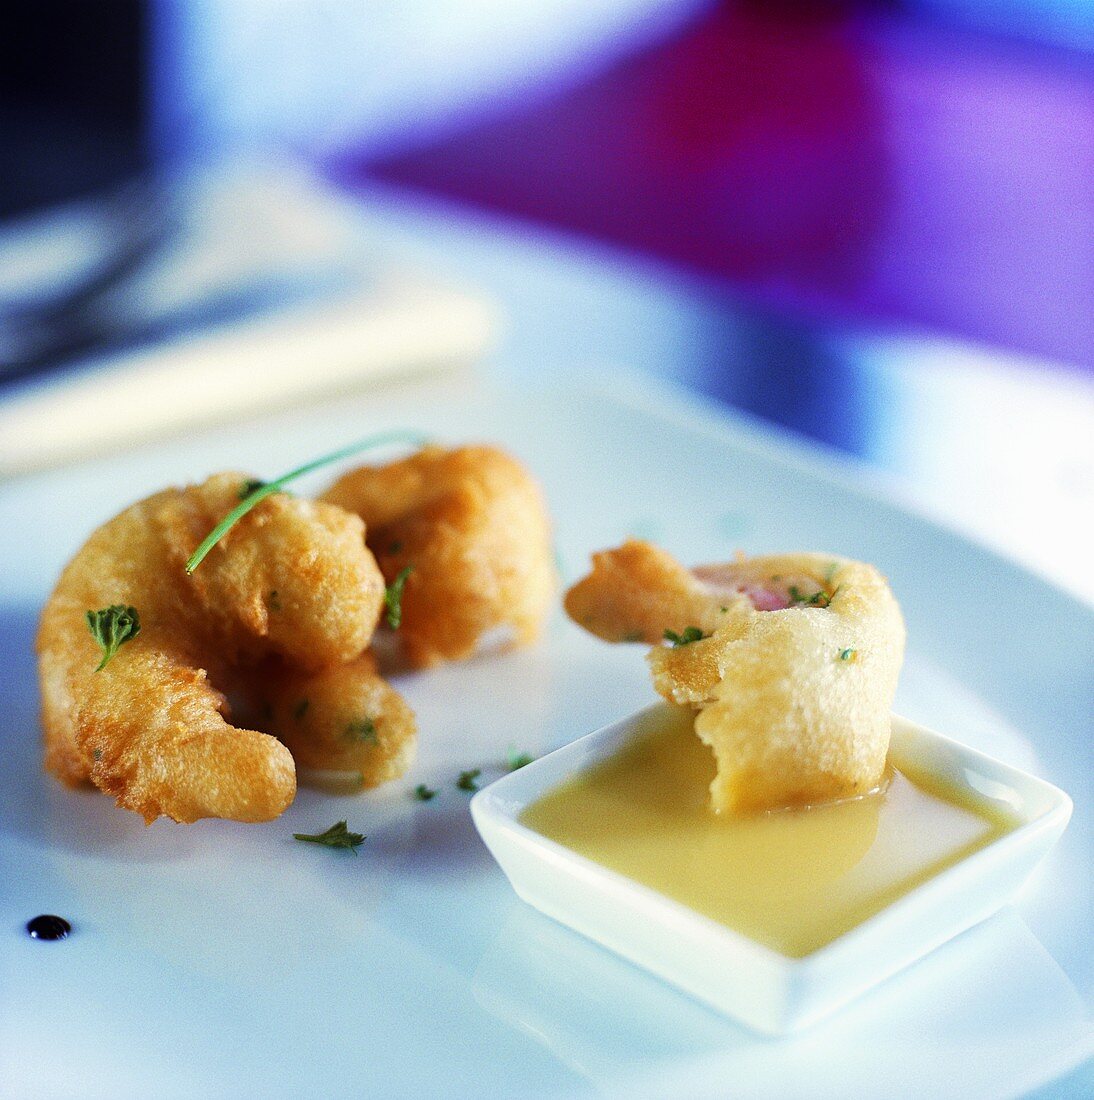 Deep-fried prawns in batter with sweet & sour pineapple sauce